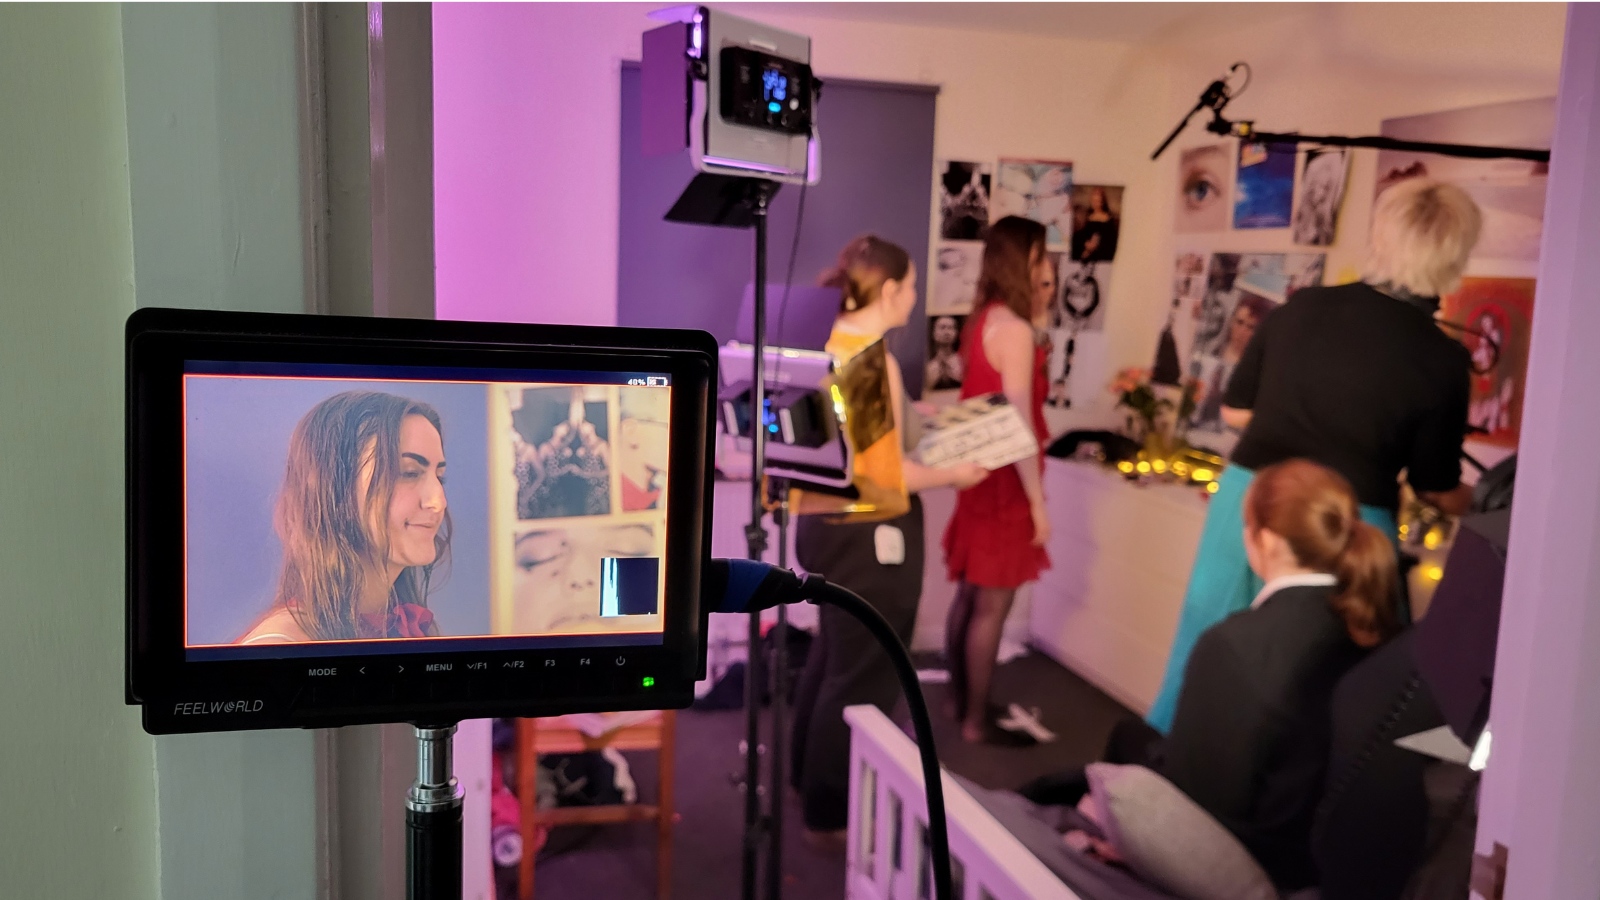 On the left is a monitor showing a close of a girl's face, behind this is. the set where filming is. taking place. three other people are in the room assisting with filming